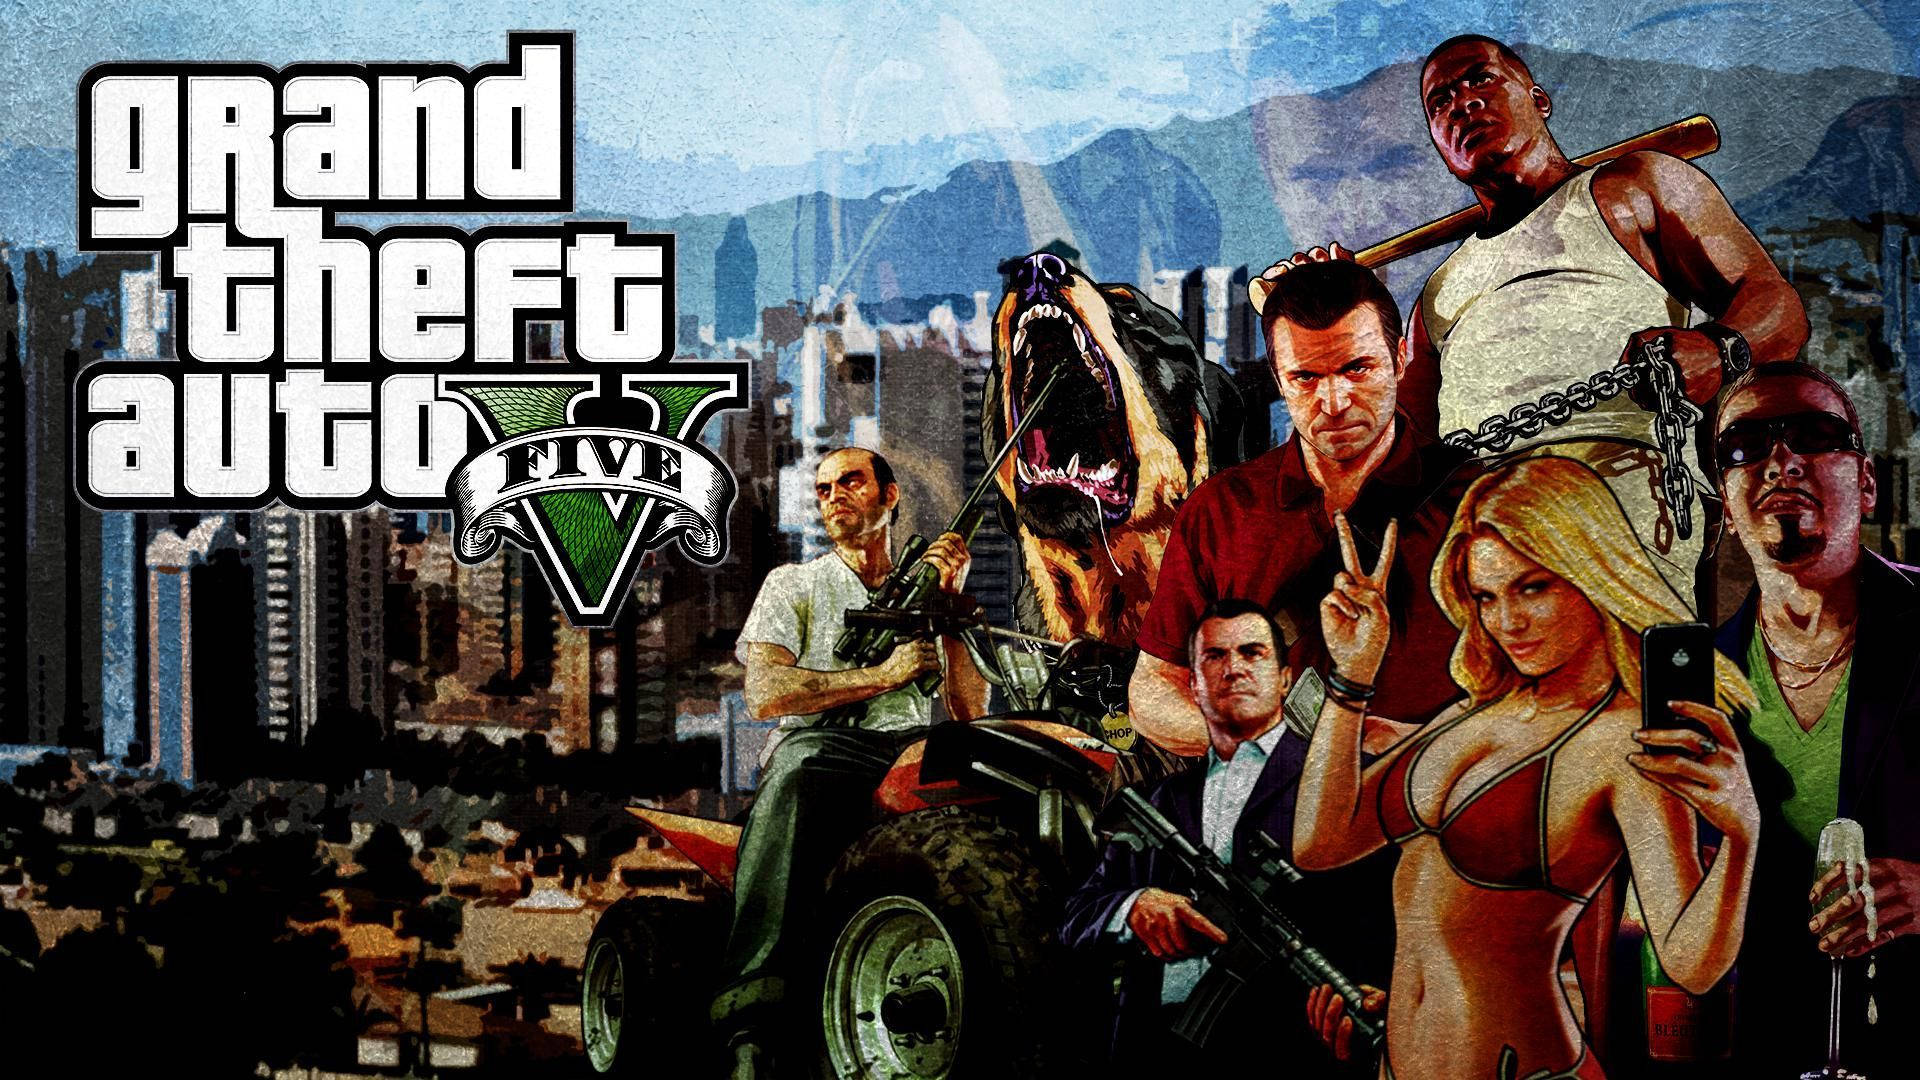 Liven up your iPhone wallpaper with GTA 5 Wallpaper